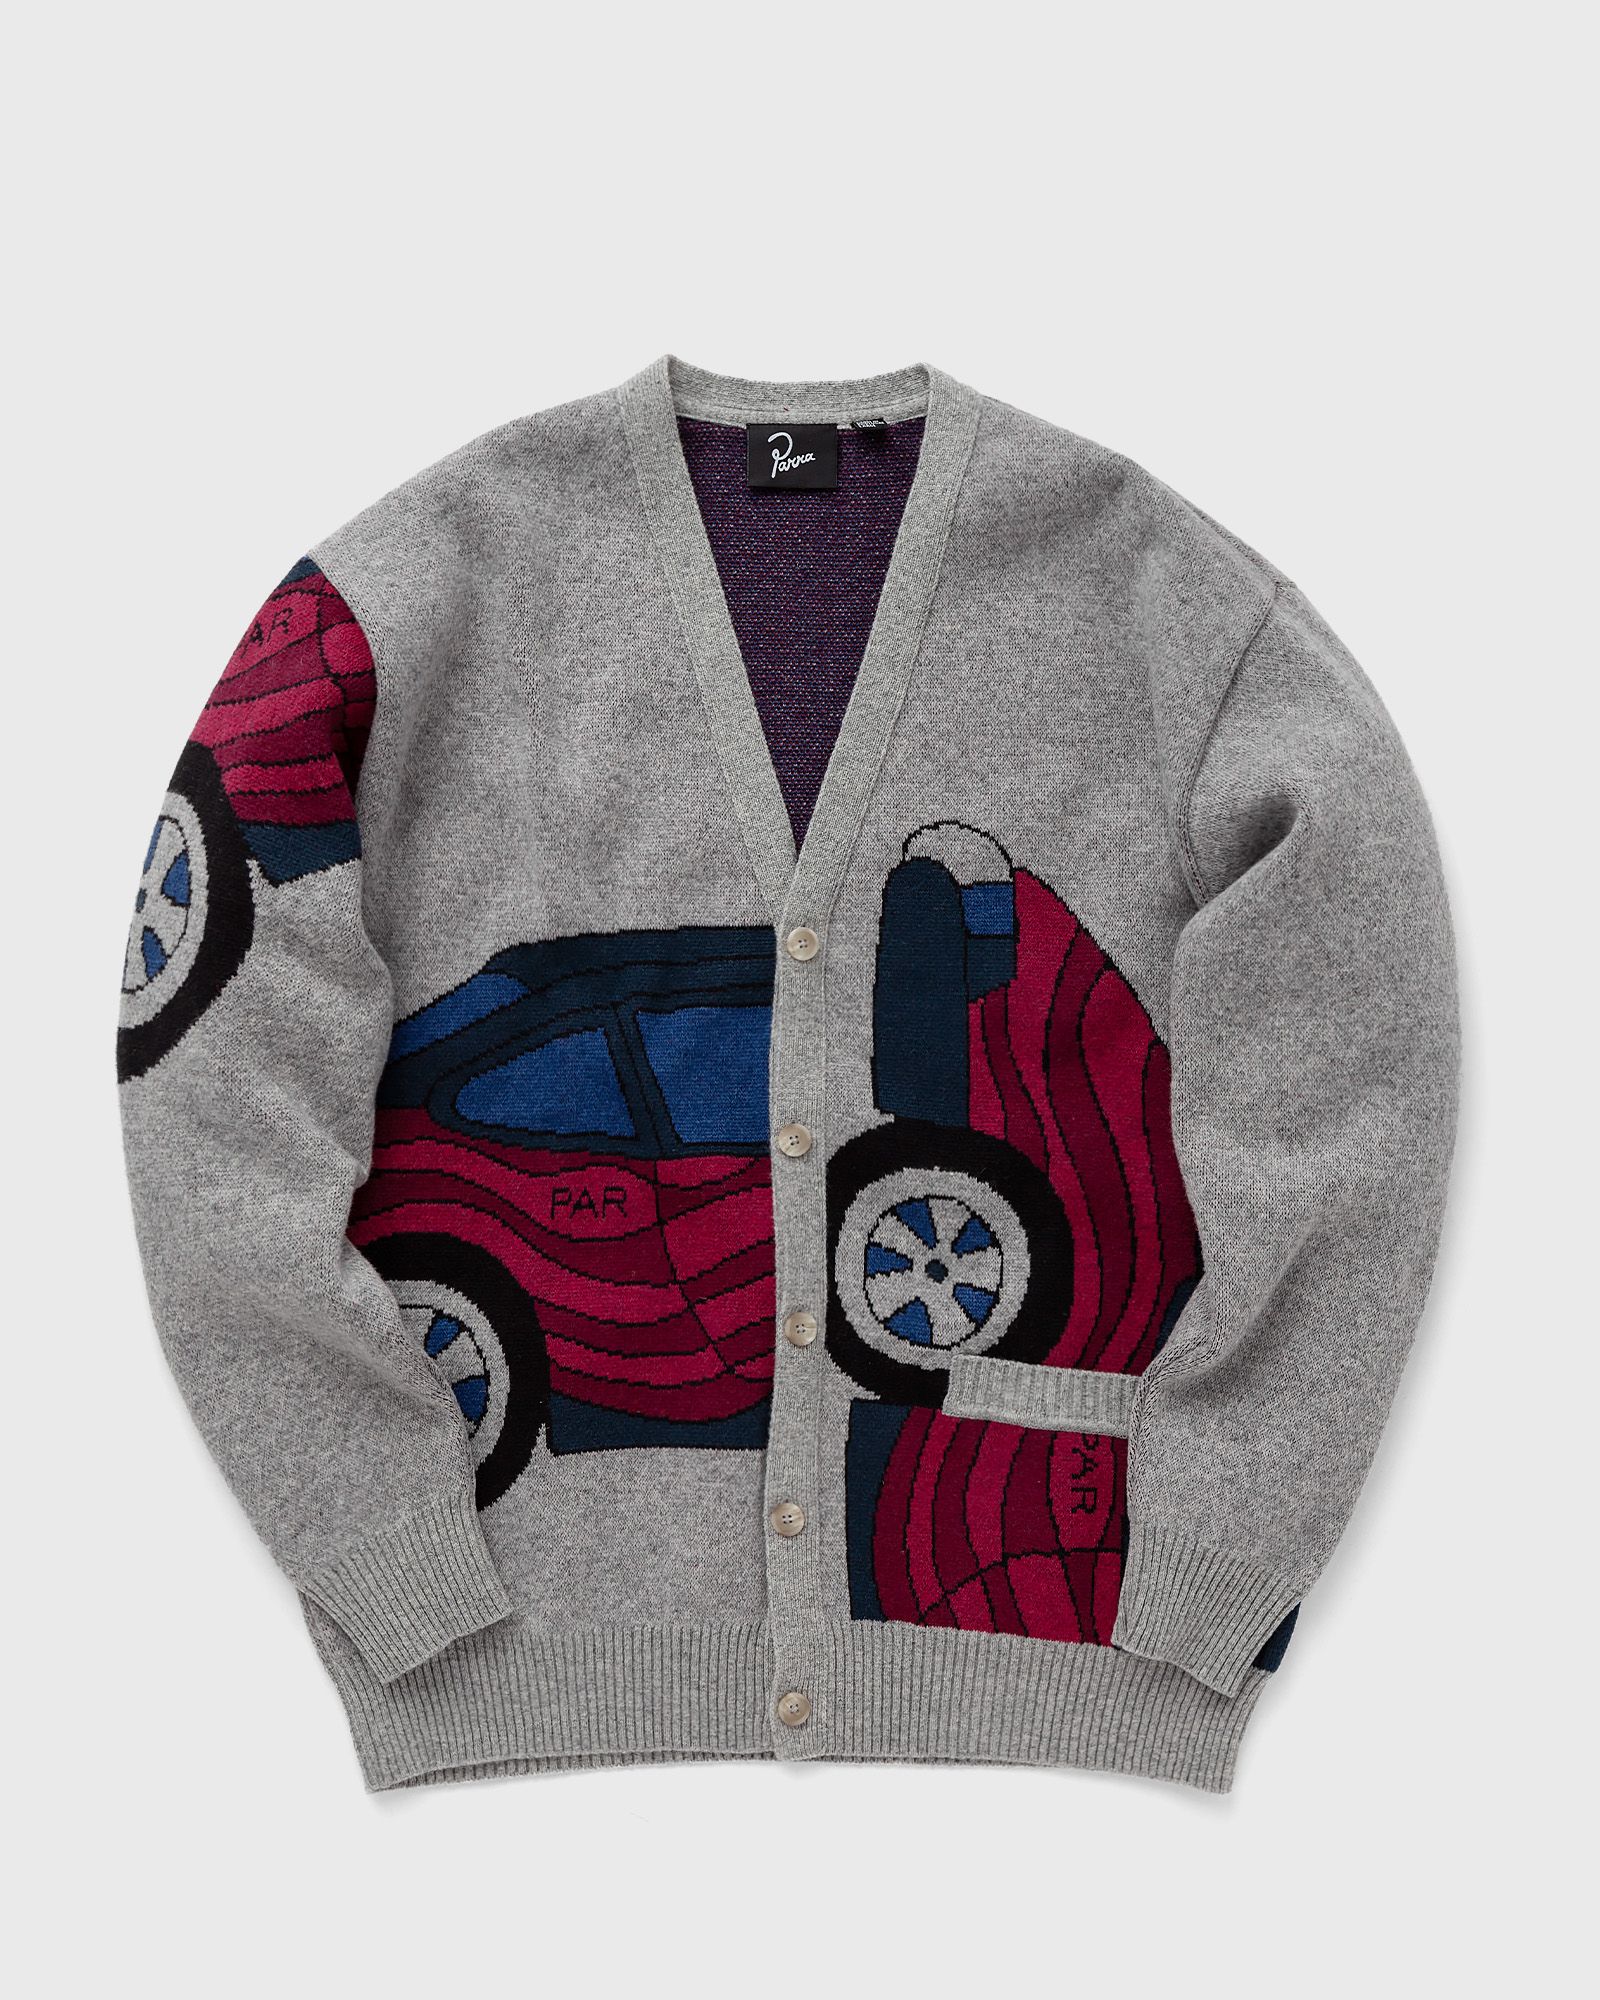 By Parra - no parking knitted cardigan men zippers & cardigans grey|red in größe:xl